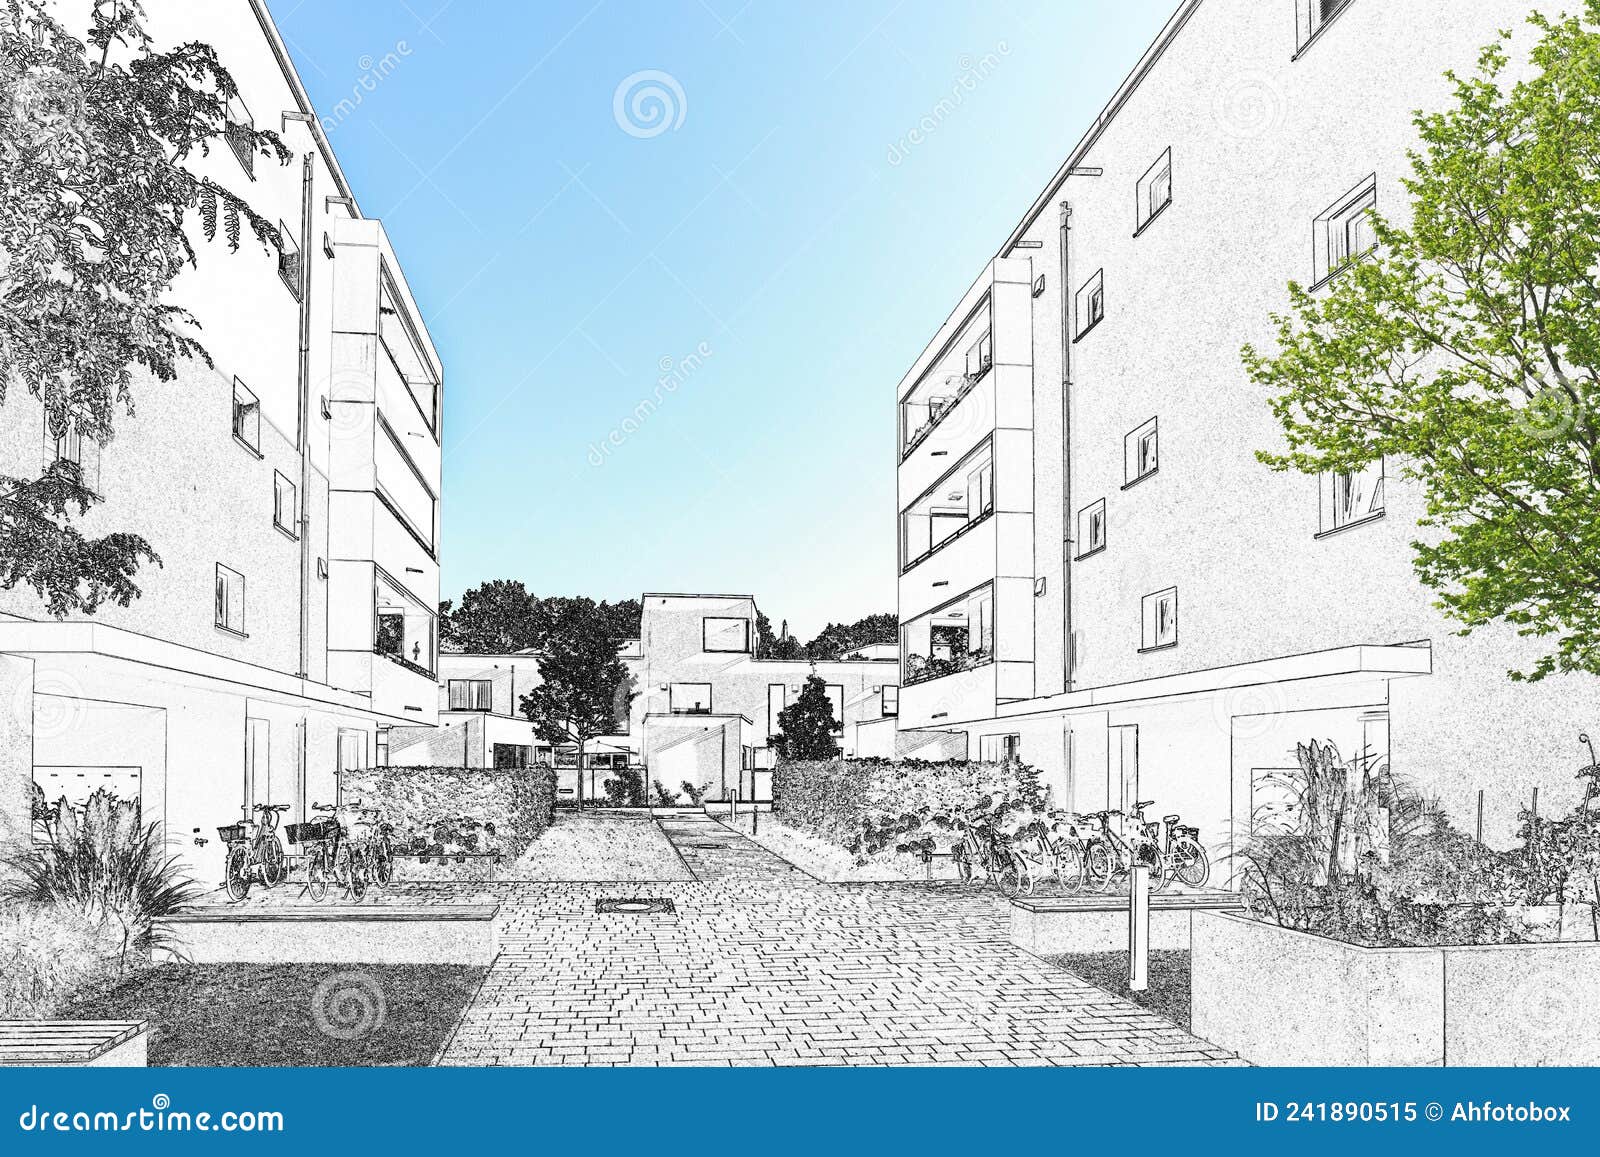 Drawing Sketch of a Residential Area with Modern Apartment ...